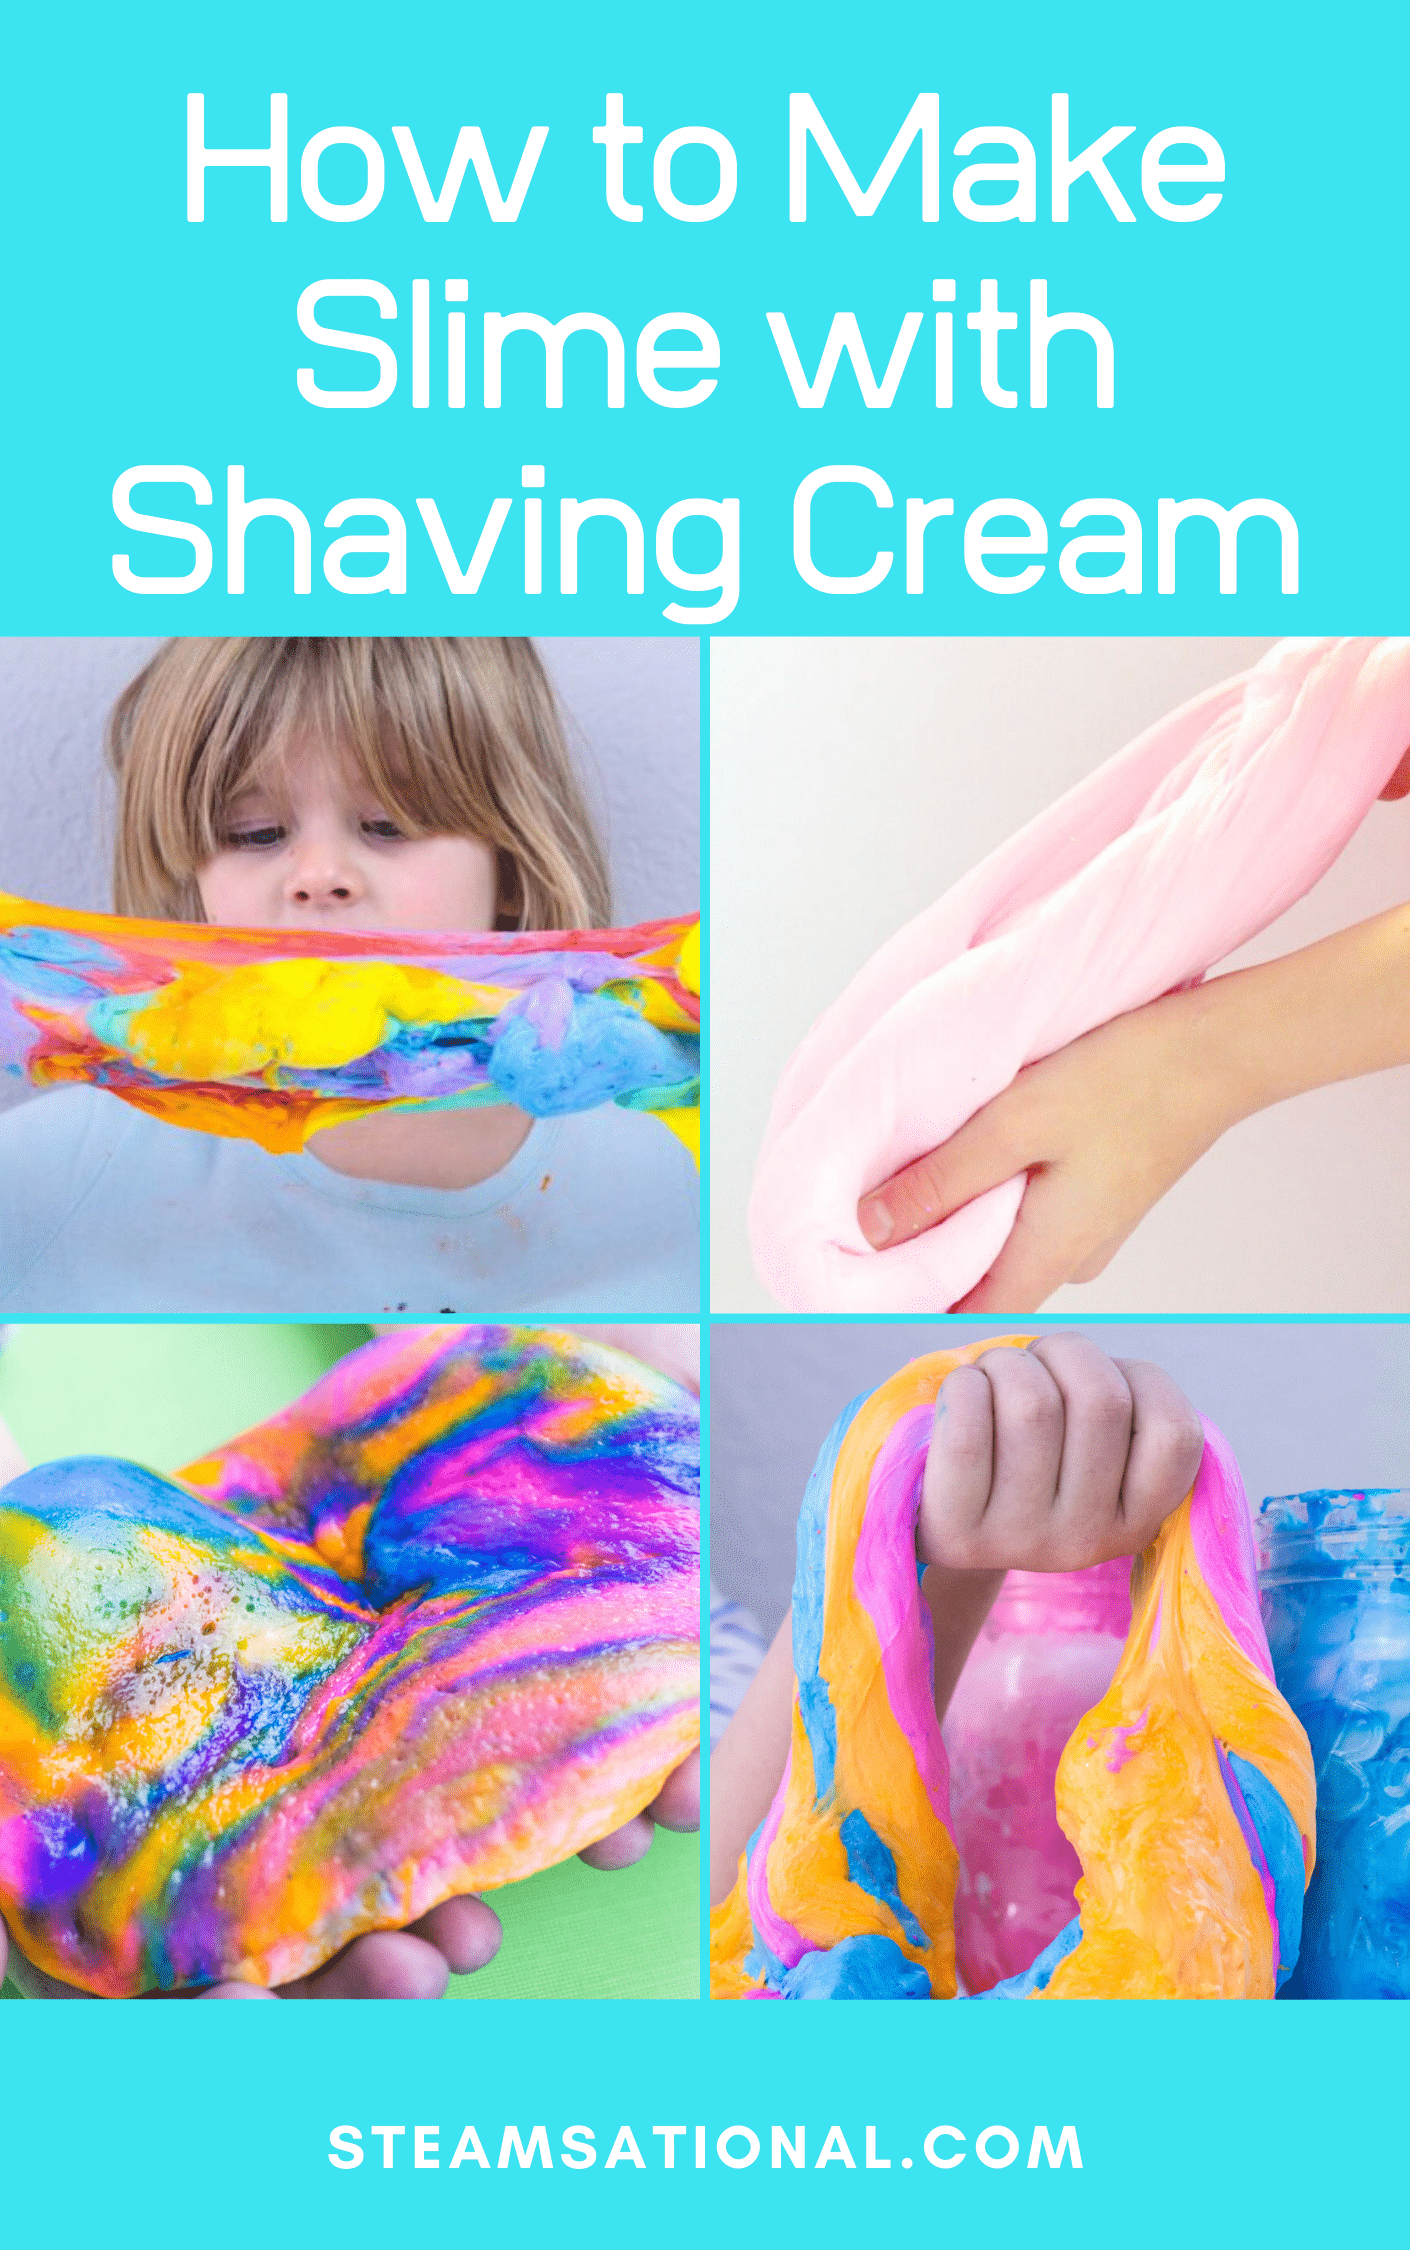 Want to know how to make fluffy slime with sta flo? This fluffy slime with liquid starch recipe will show you how to make fluffy slime without borax and how to make fluffy slime with shaving cream.